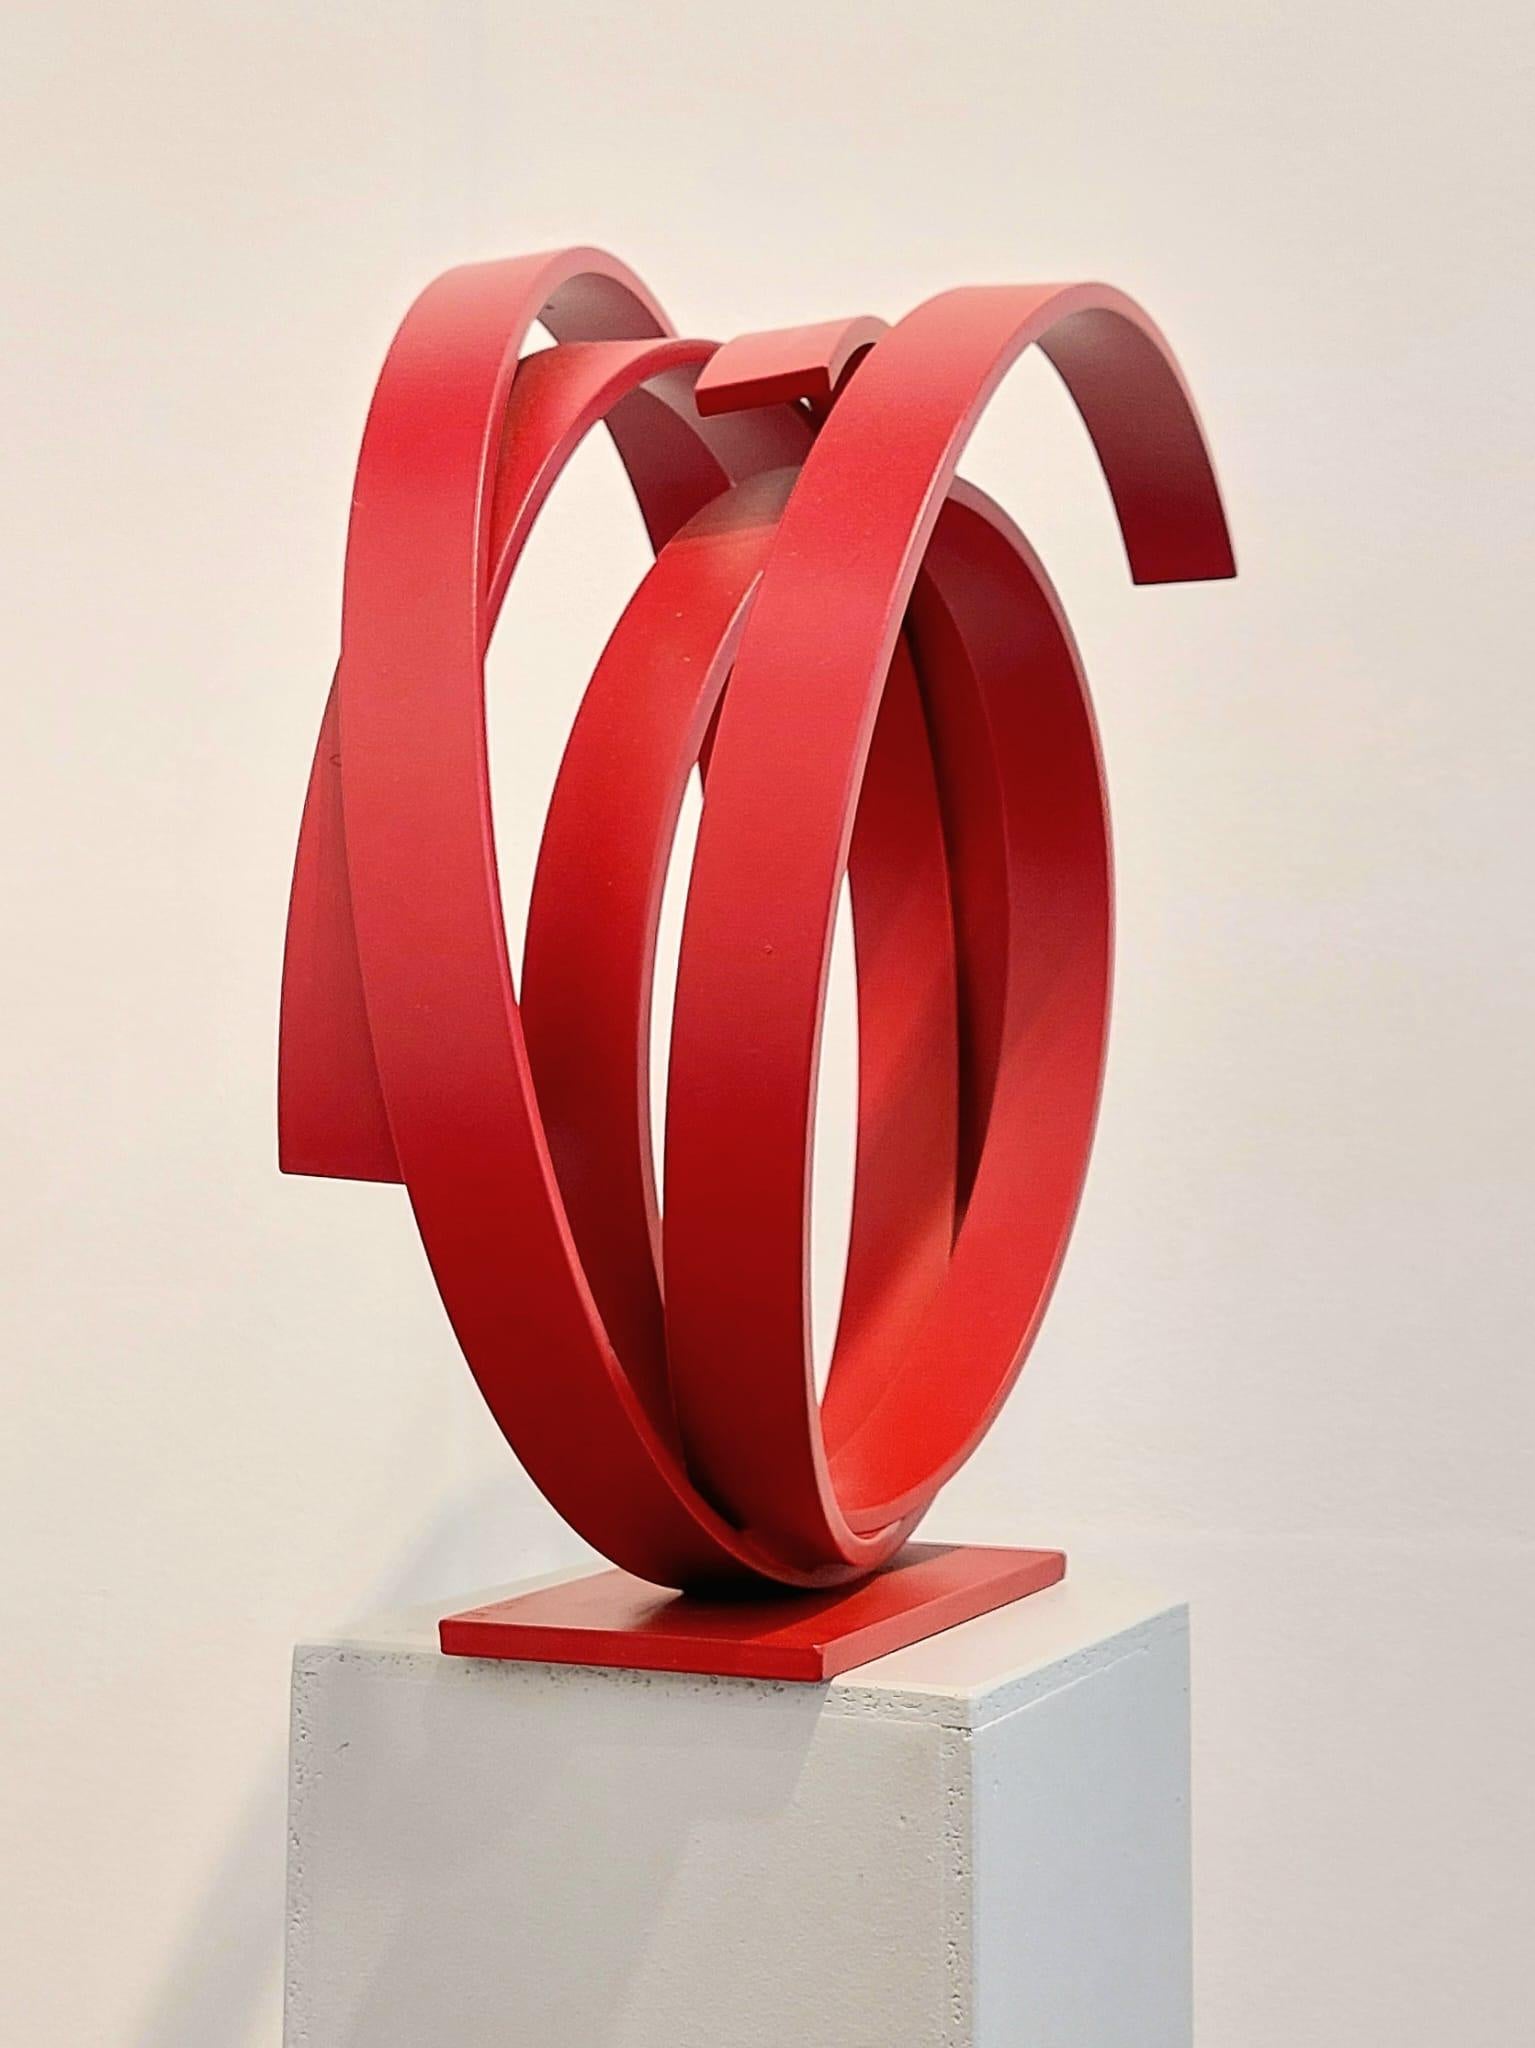 Small Red Orbit by Kuno Vollet - Large Contemporary Round Orbit sculpture  For Sale 2